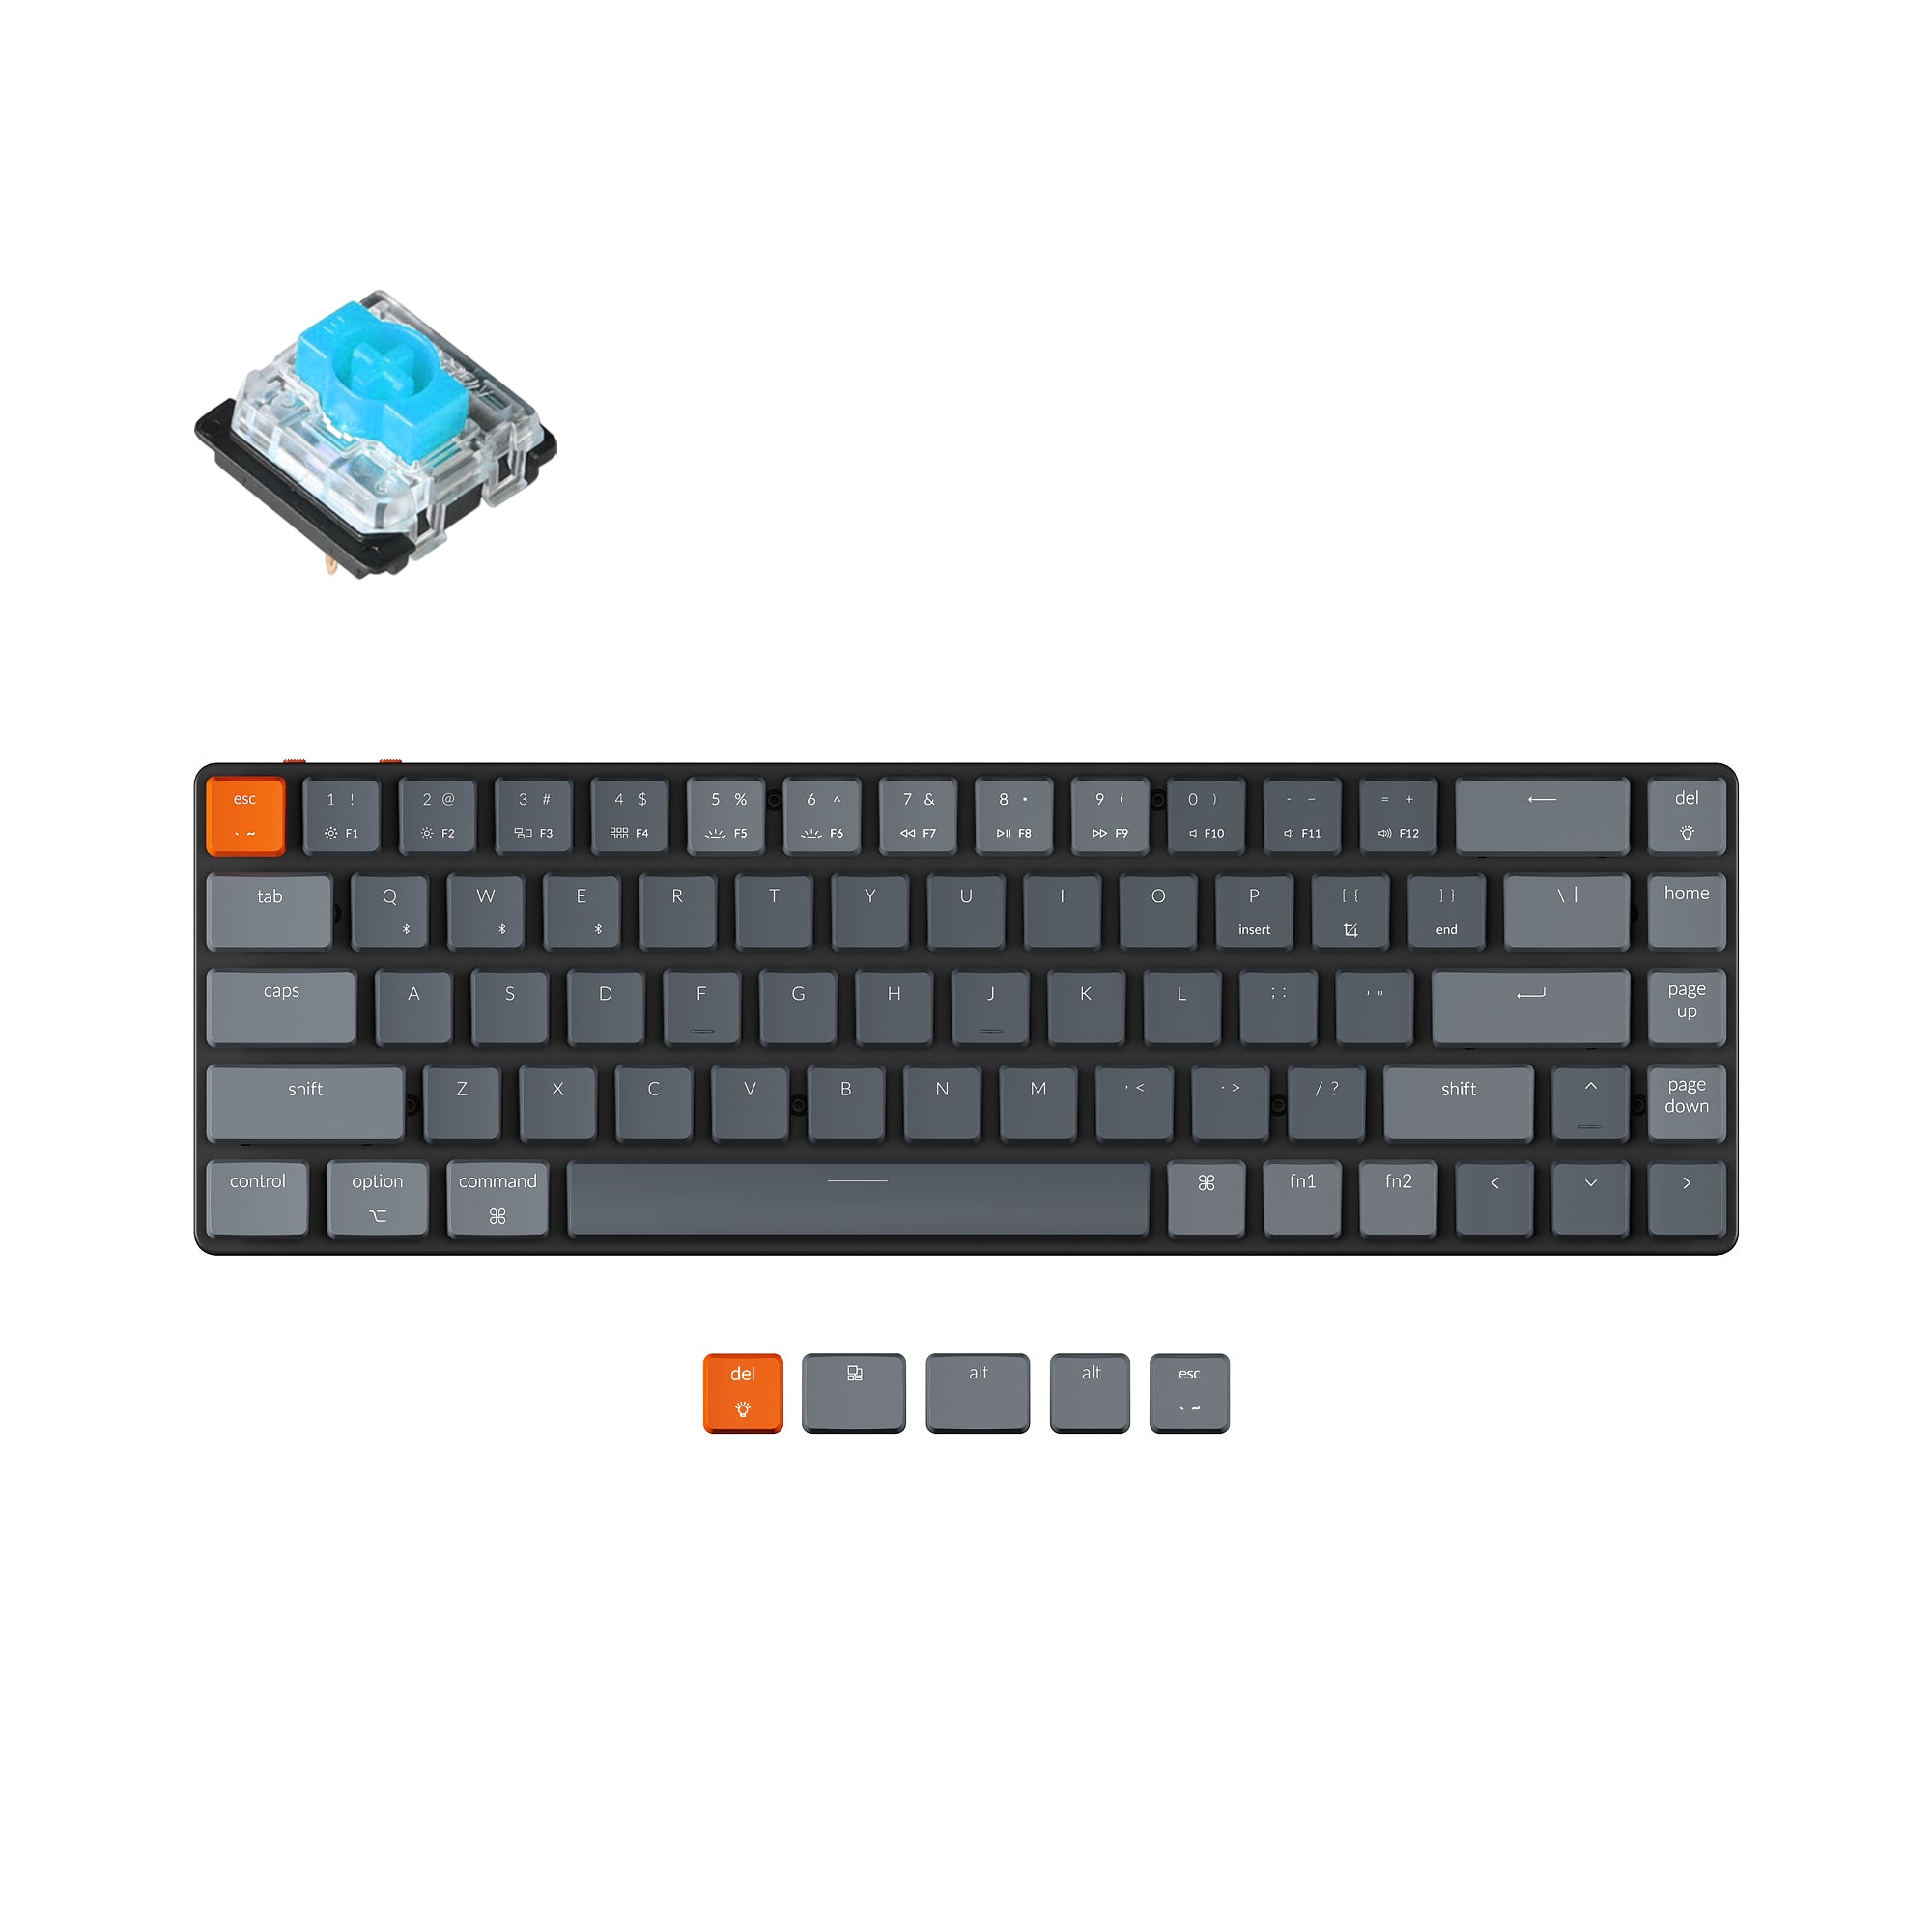 Keychron K7 65-percent ultra-slim compact wireless mechanical keyboard for Mac Windows Hot-swappable low-profile Gateron Mechanical blue switches with RGB backlit